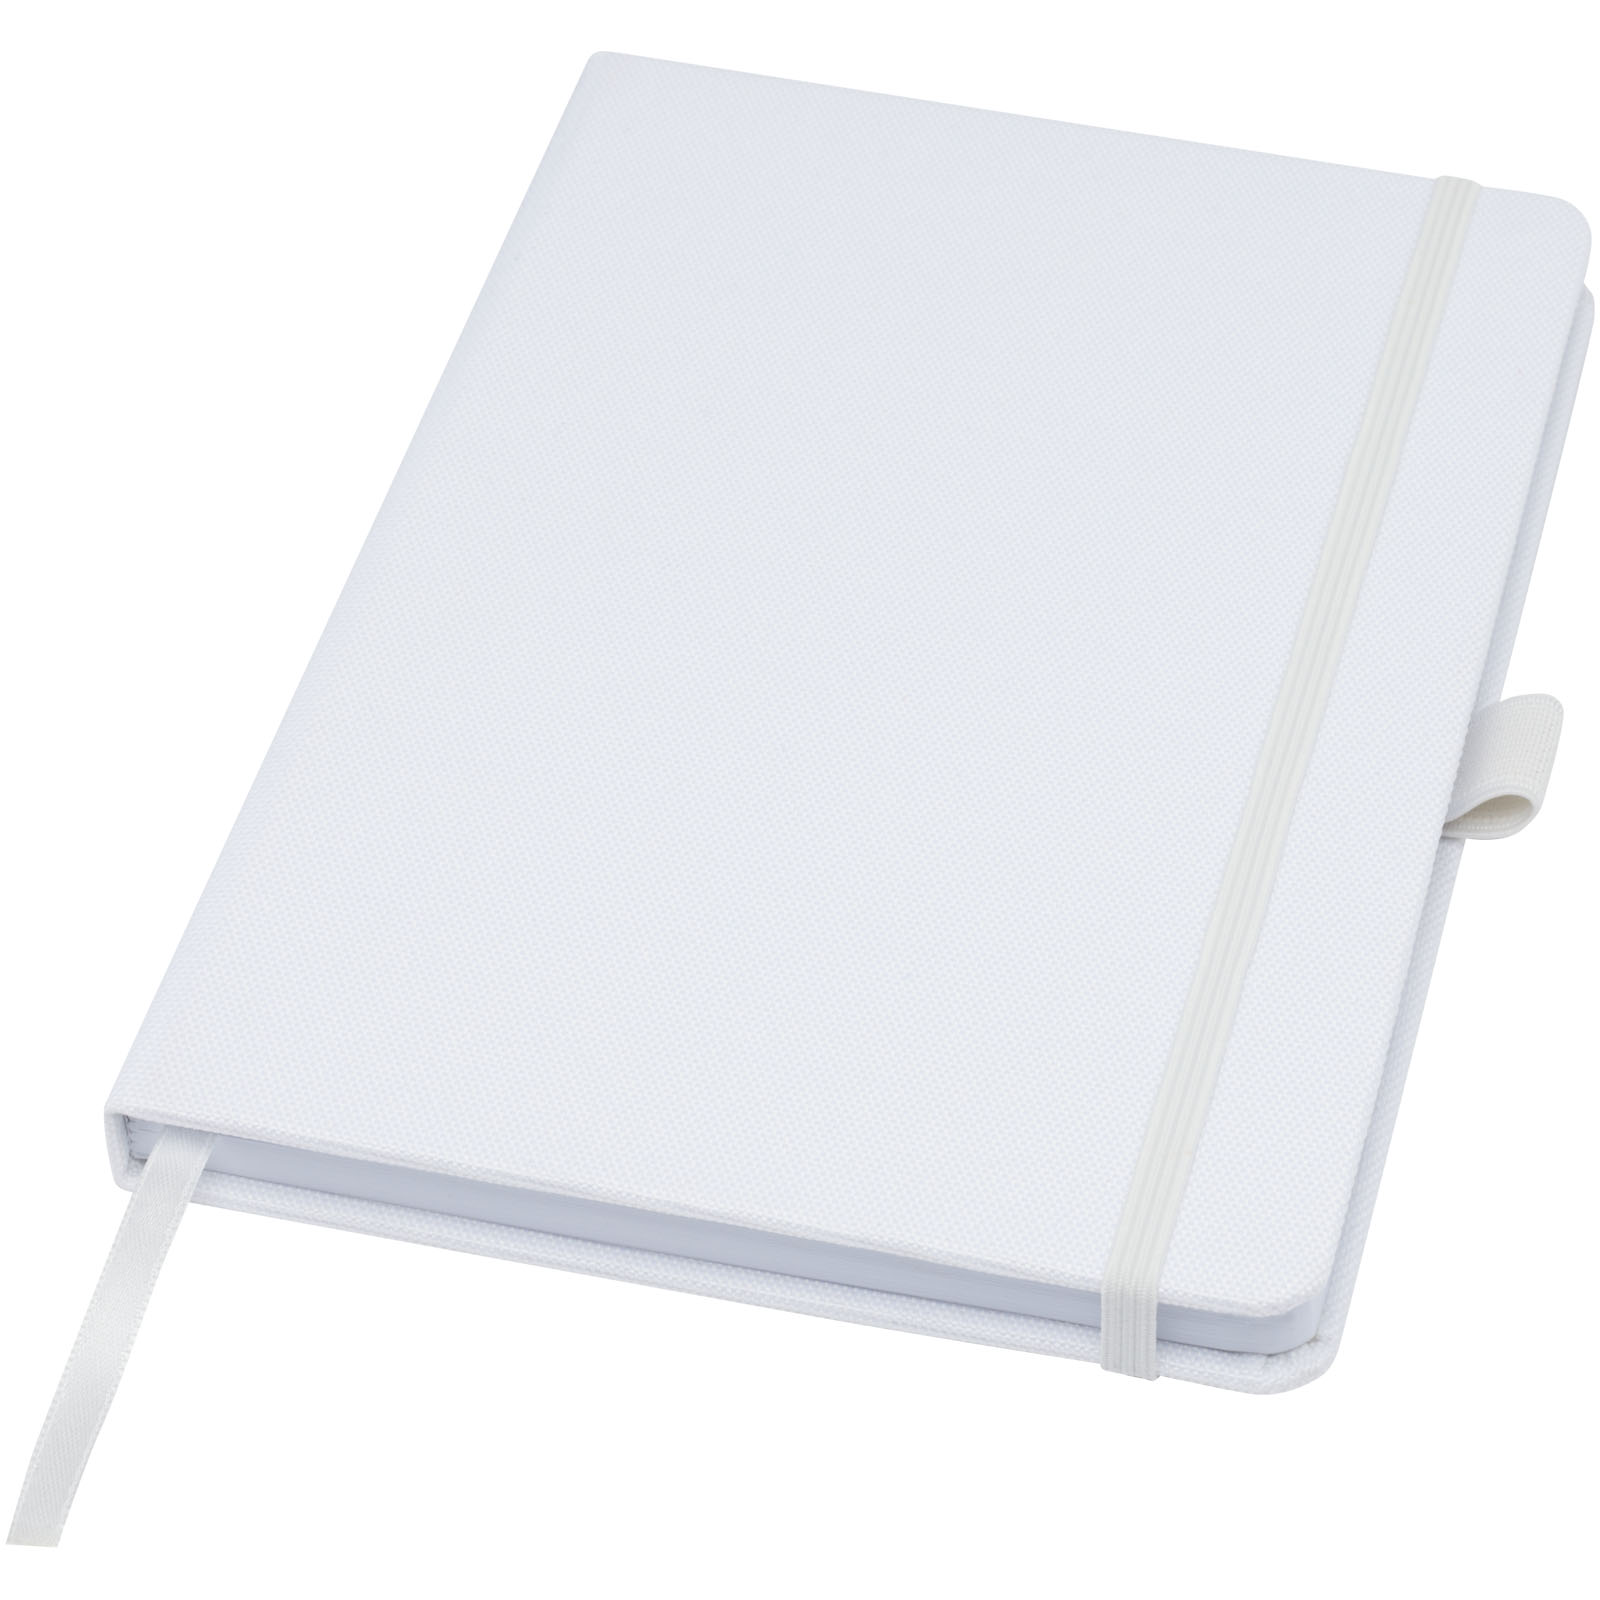 Notebooks & Desk Essentials - Honua A5 recycled paper notebook with recycled PET cover